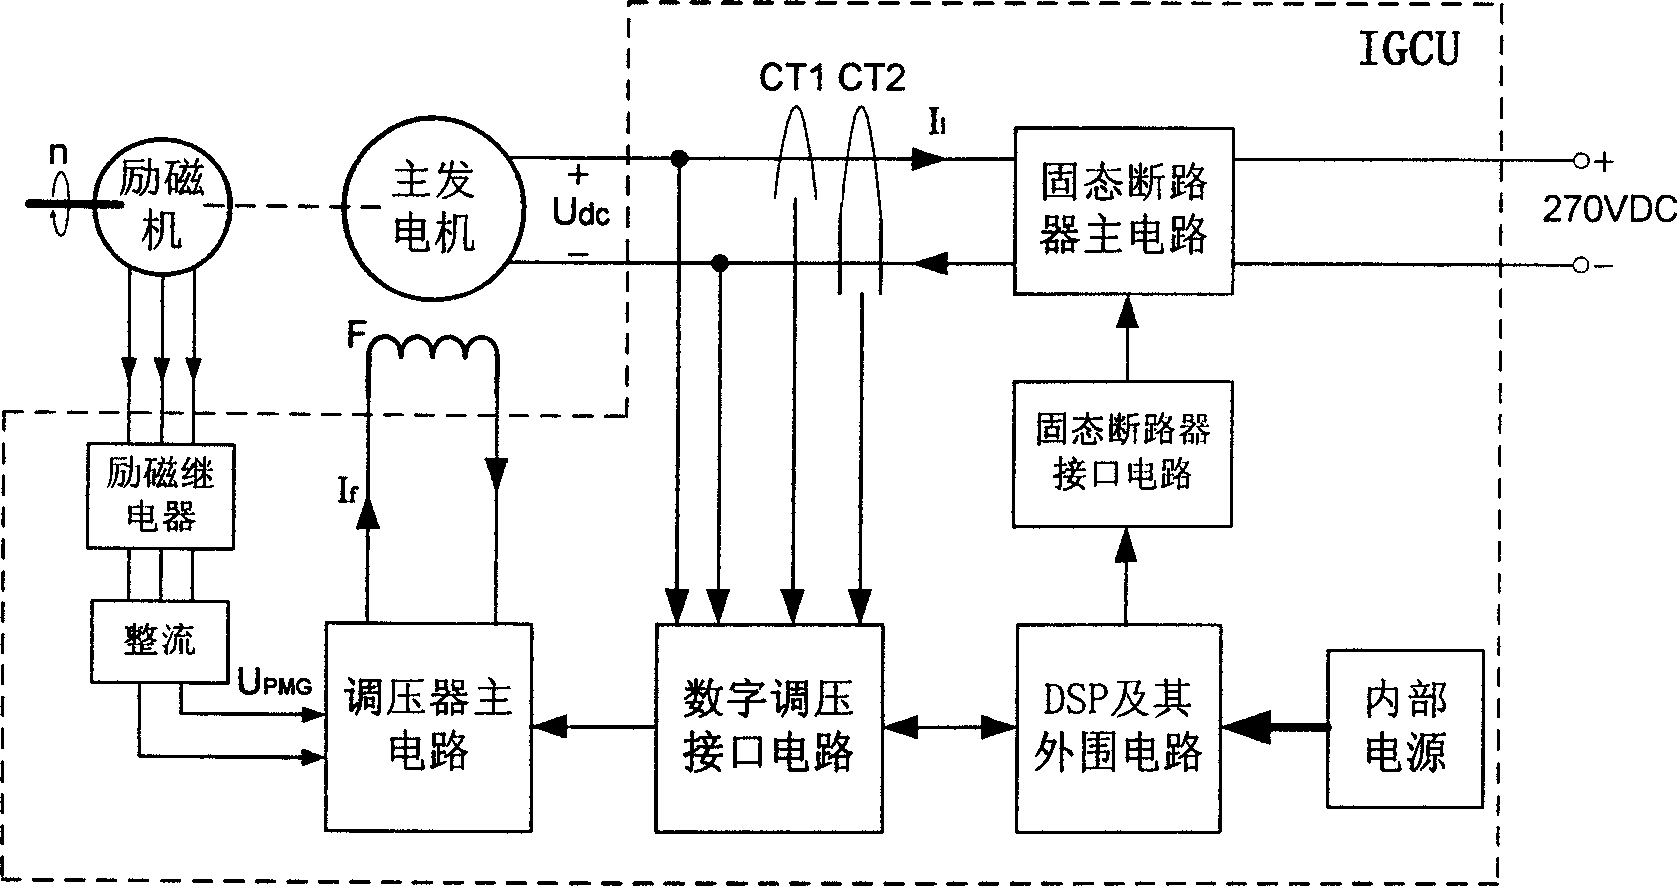 Integrated generator controller for high-voltage DC. generating system